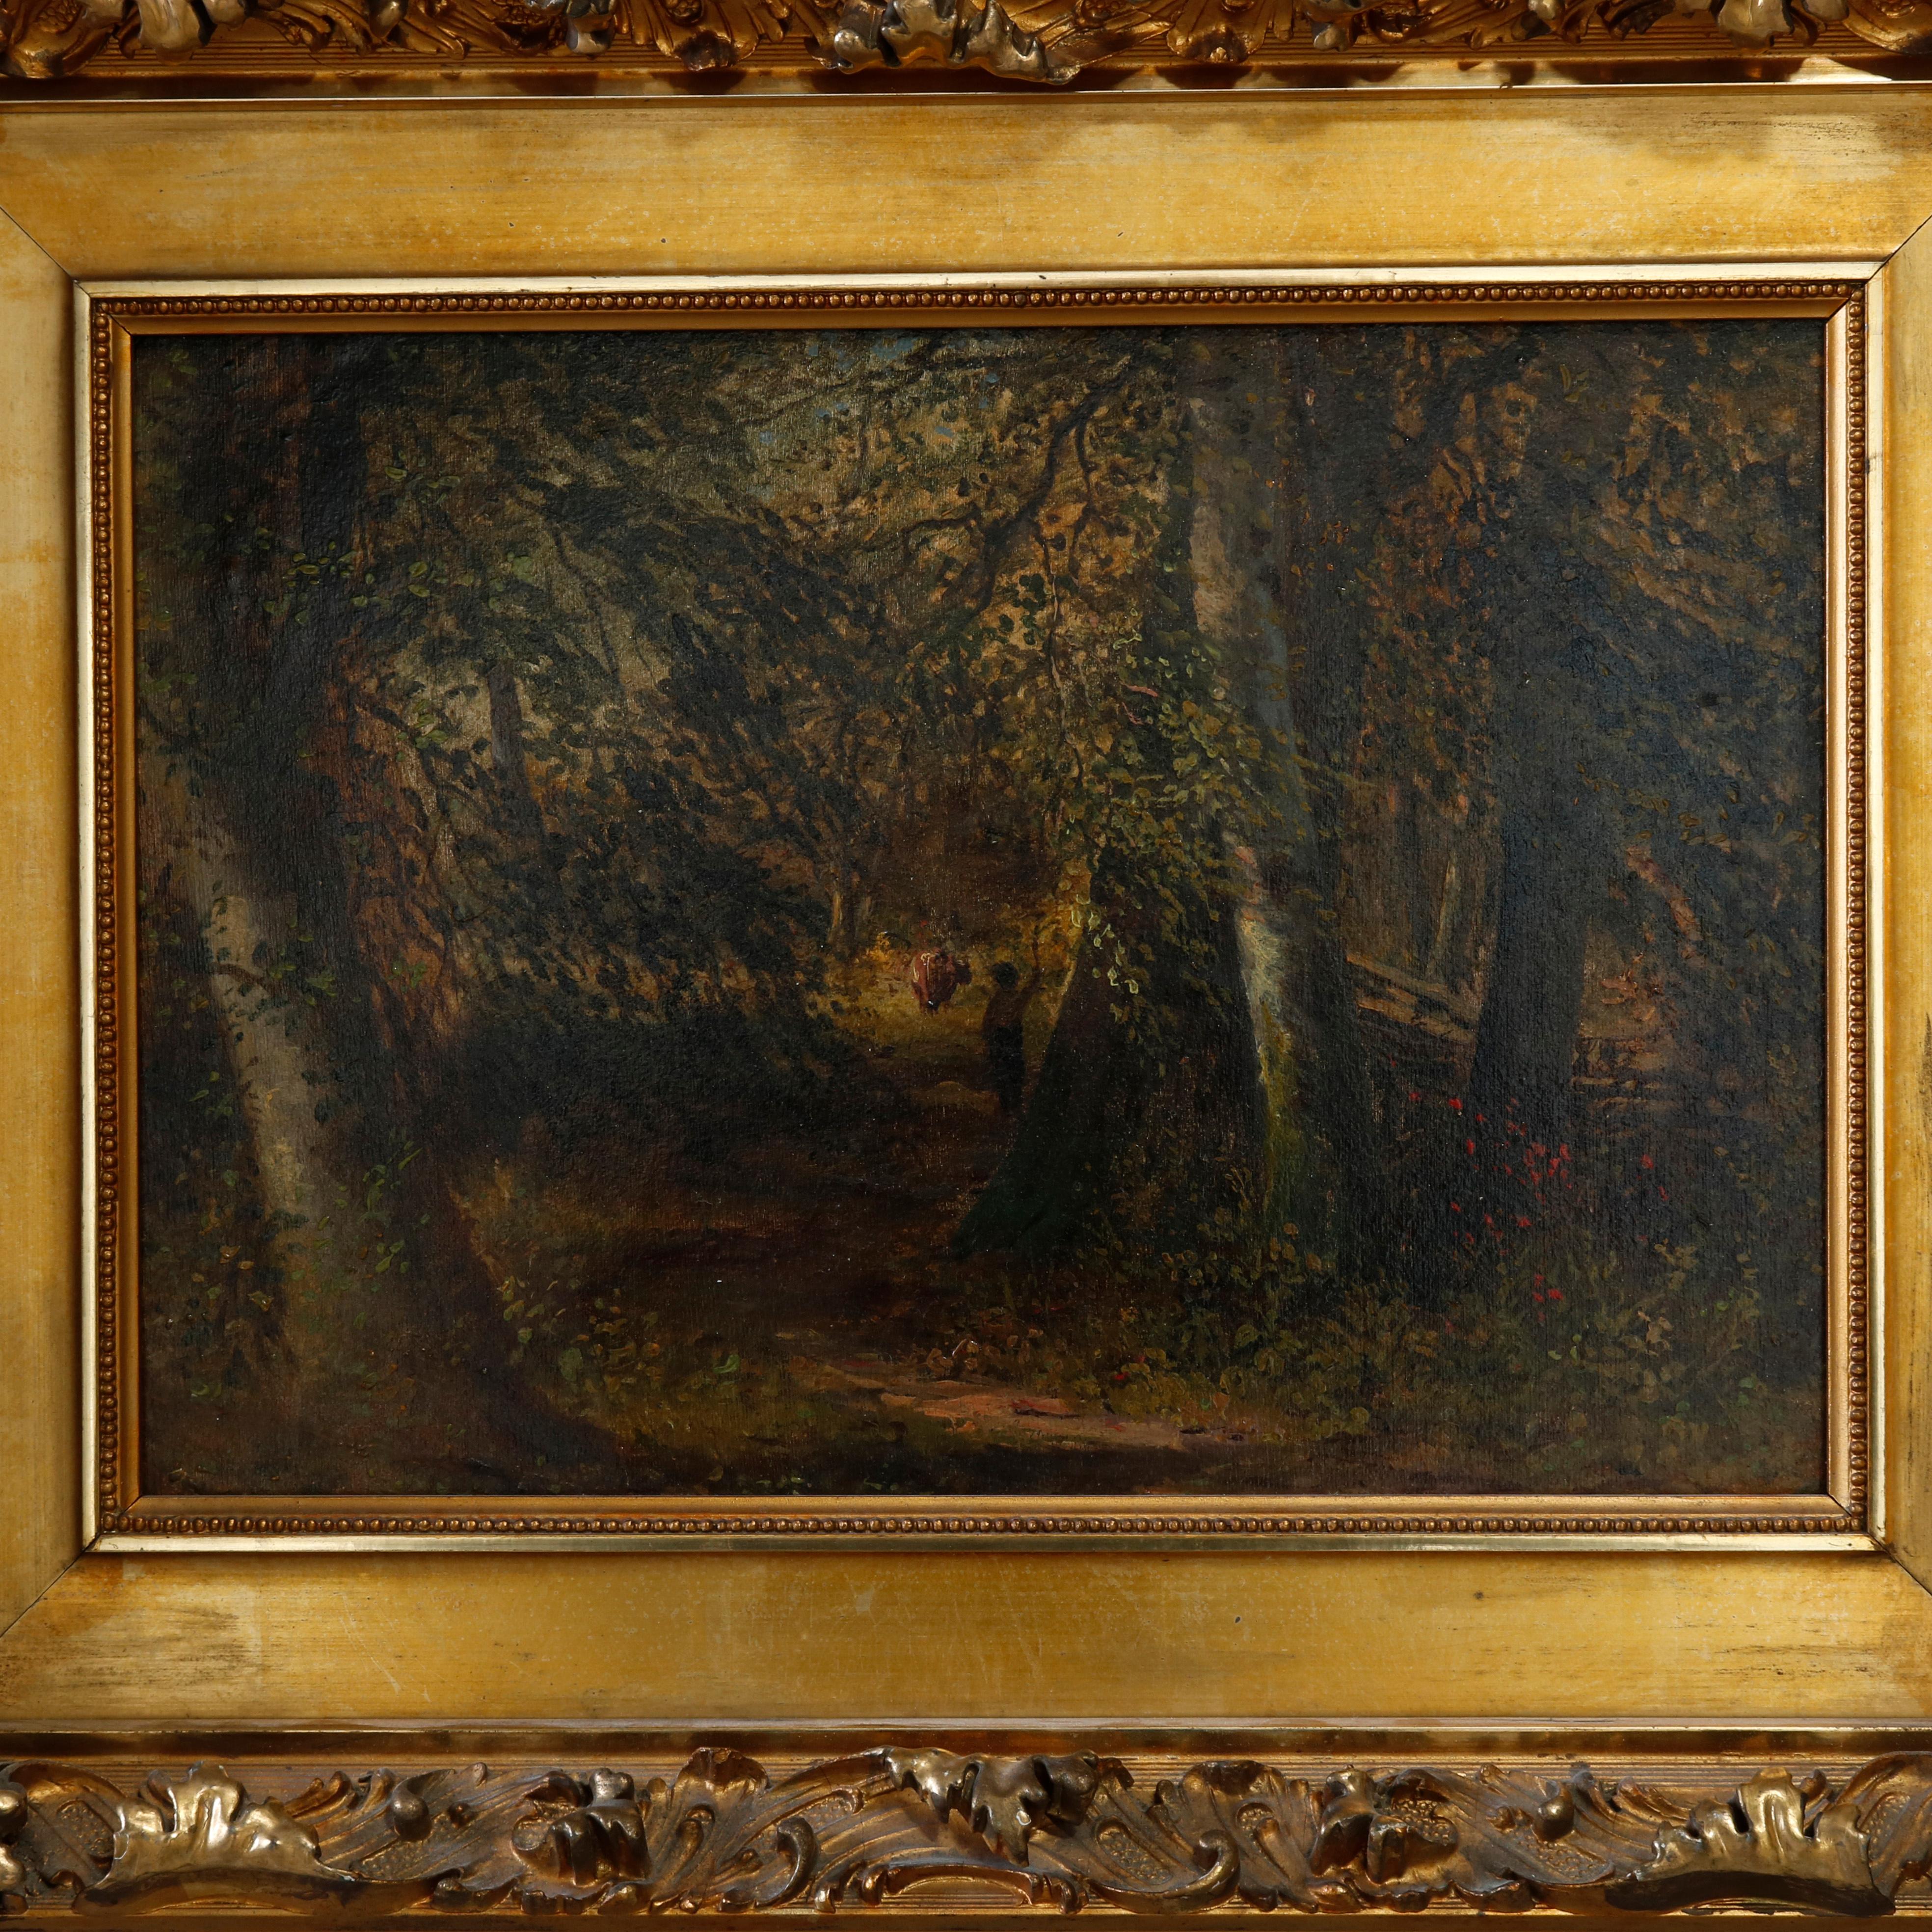 American Antique Painting of Forest Landscape with Figures, Ornate Giltwood Frame, c 1890